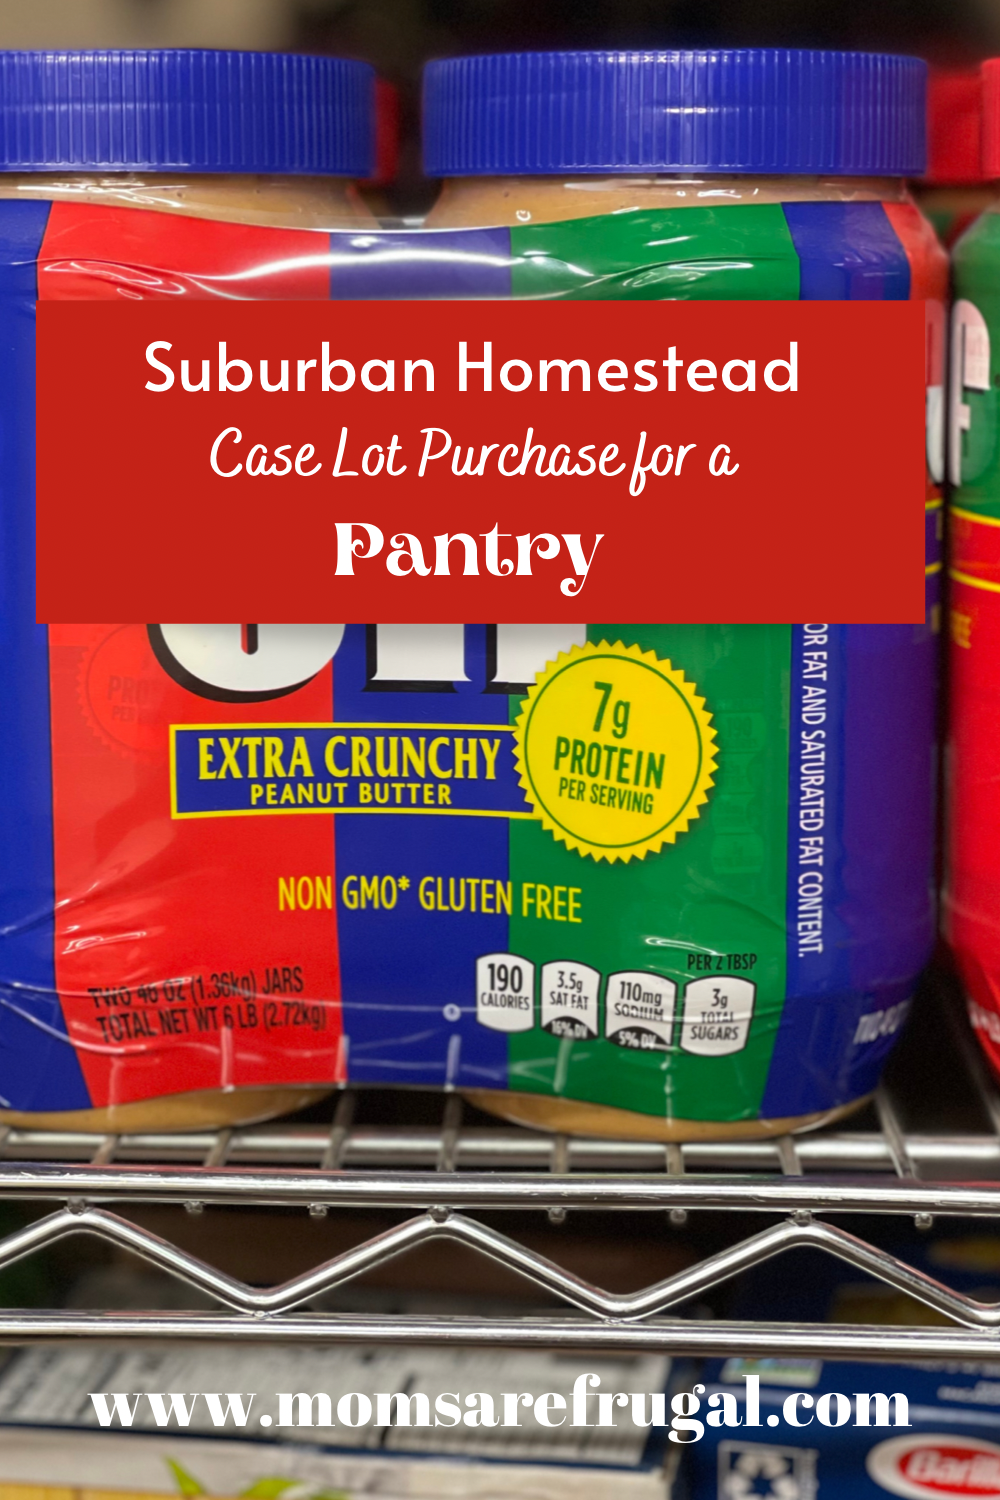 Suburban Homestead Case Lot Purchase for a Pantry